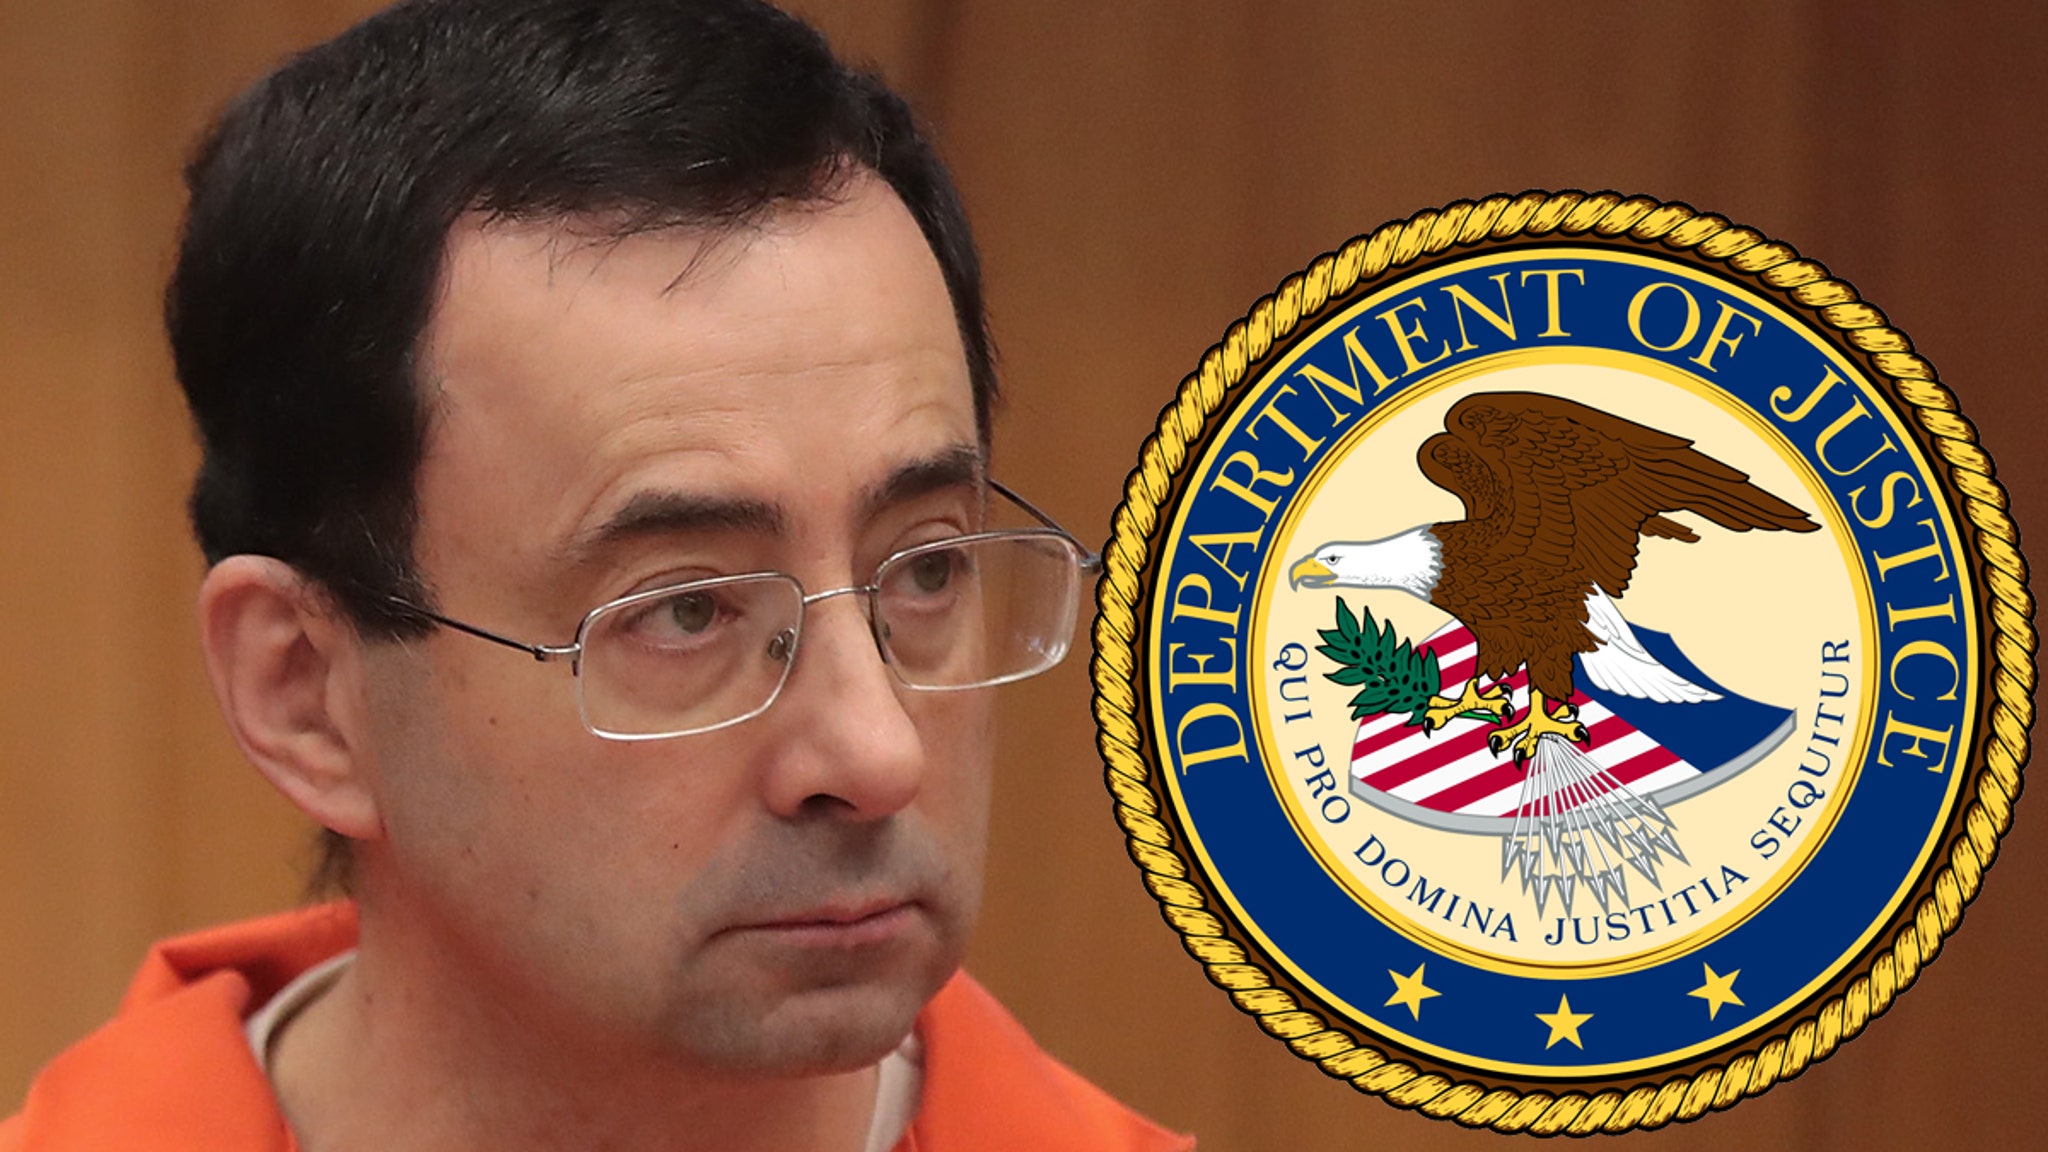 Larry Nassar Victims Receive $138 Million From Government Over Botched FBI Investigation